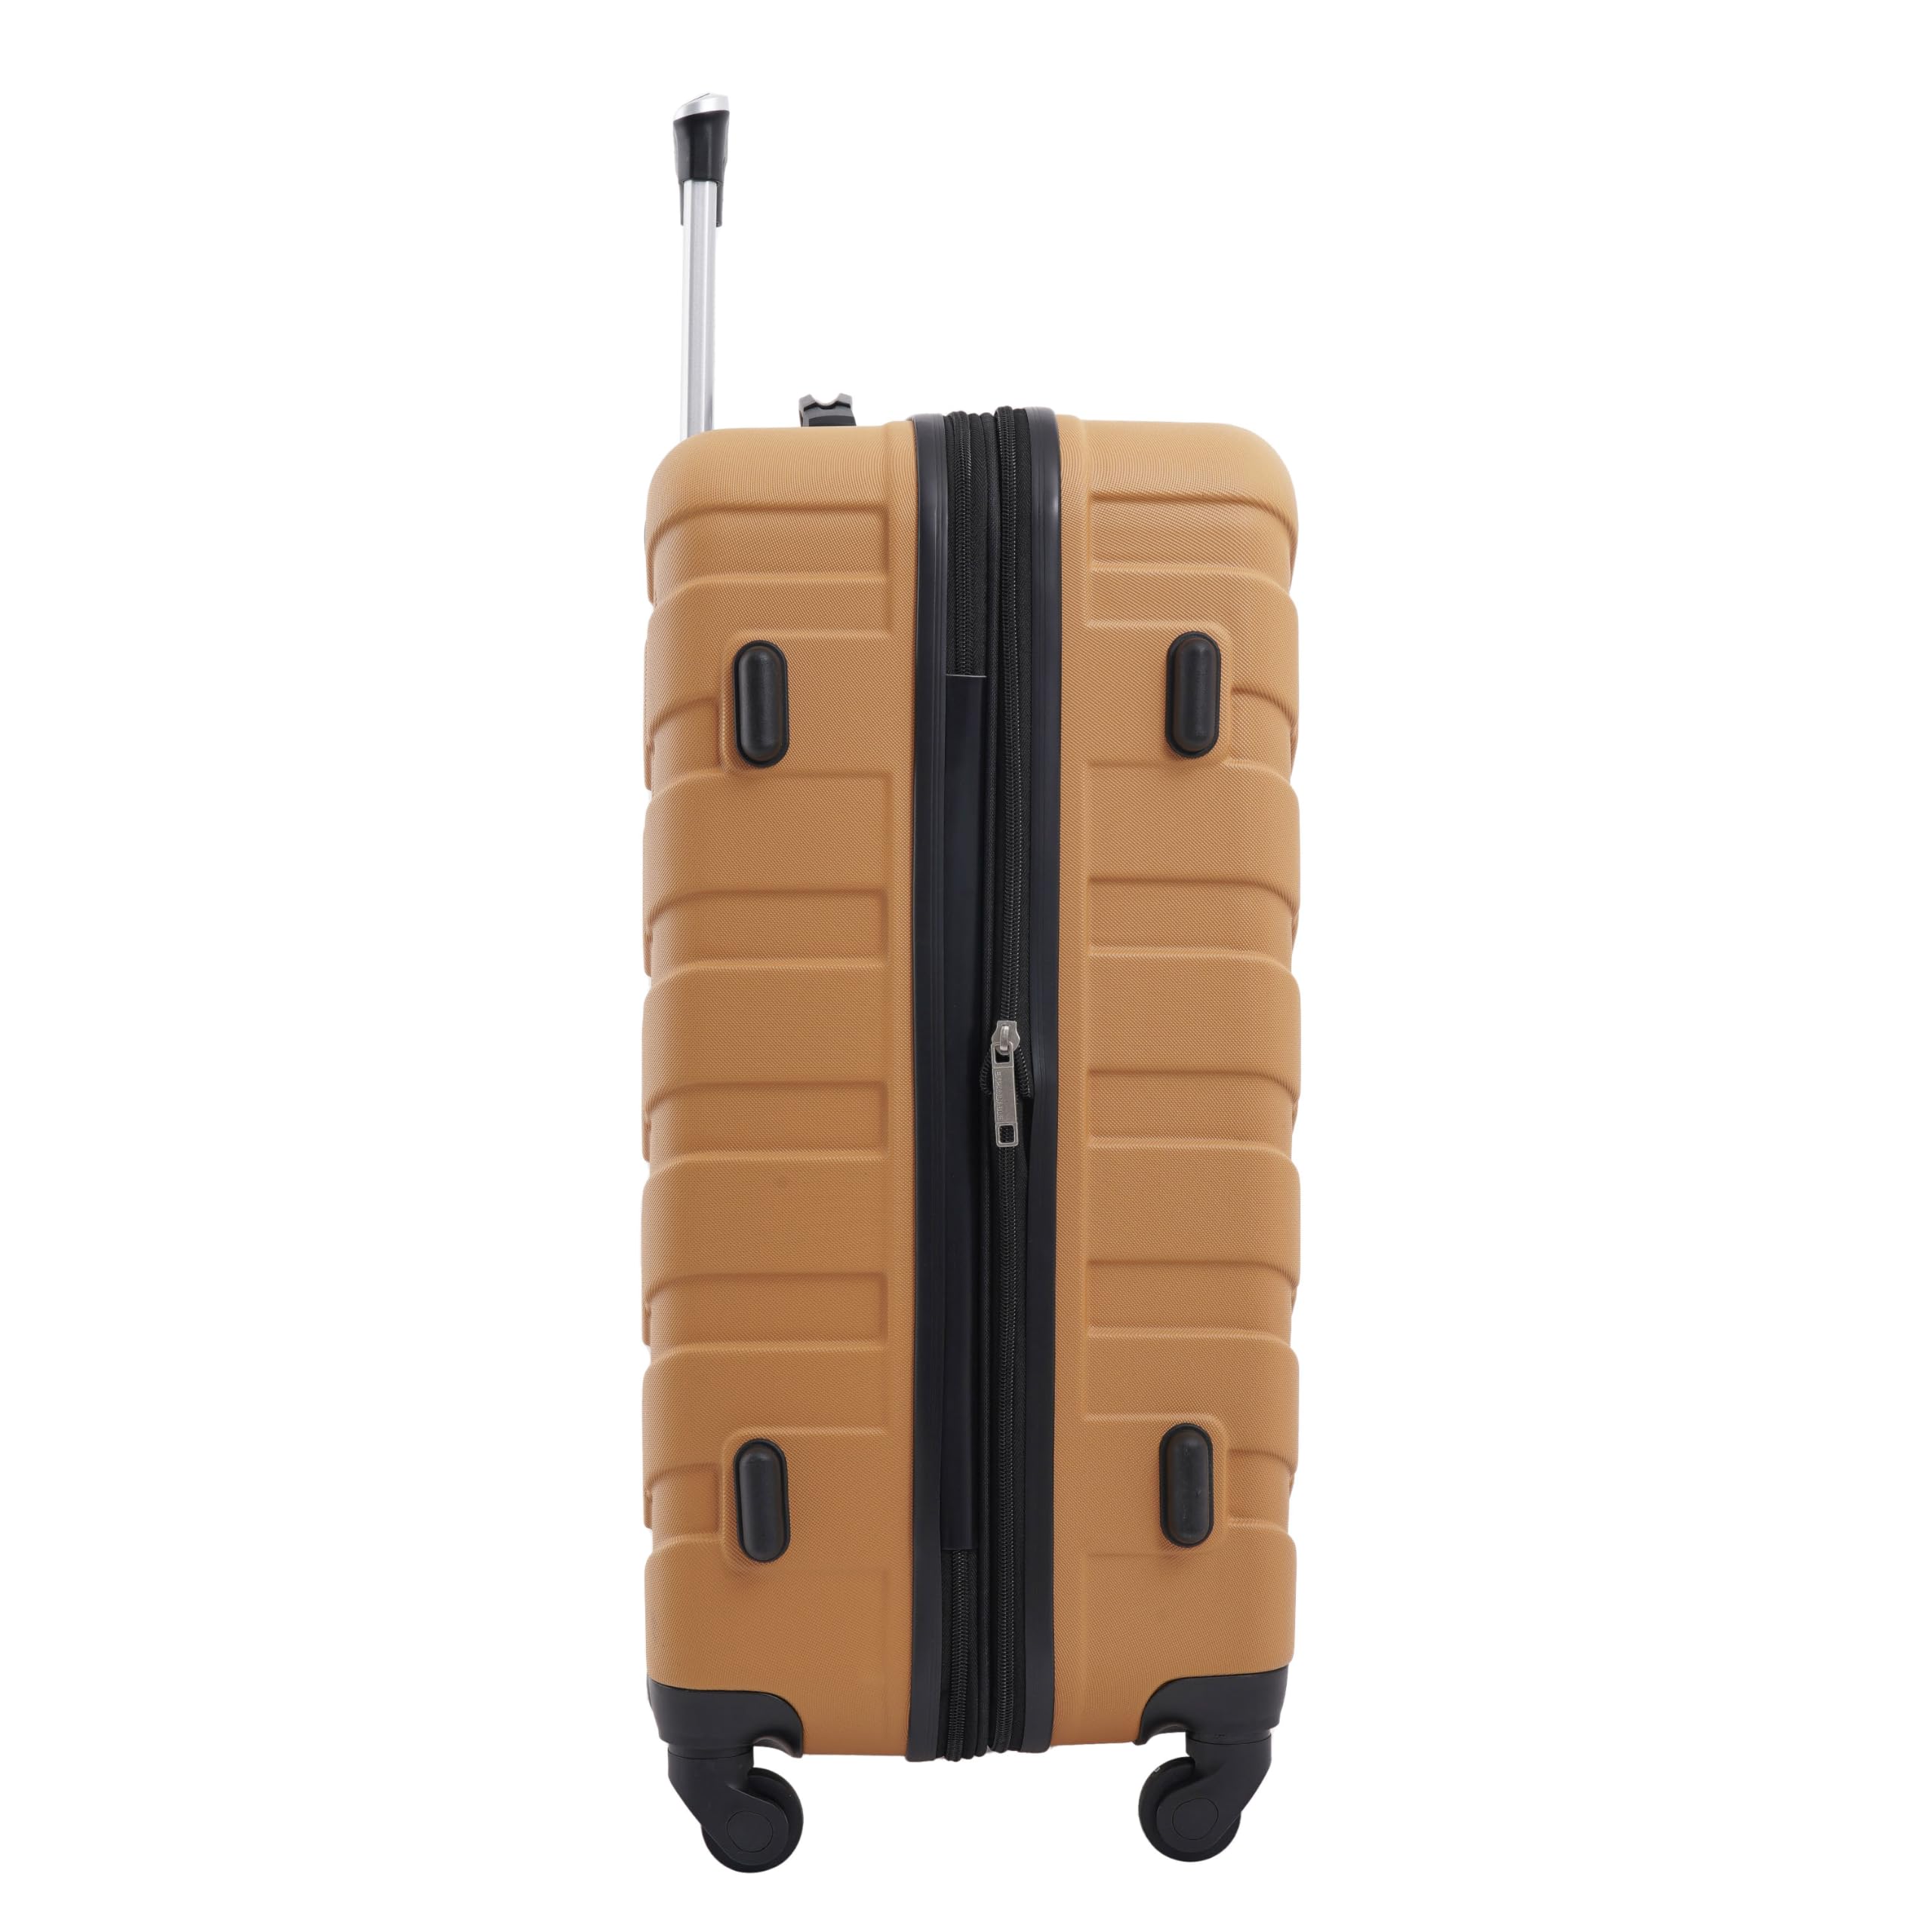 Wrangler Luggage and Packing Cubes, Amber Gold, 4-Piece Set